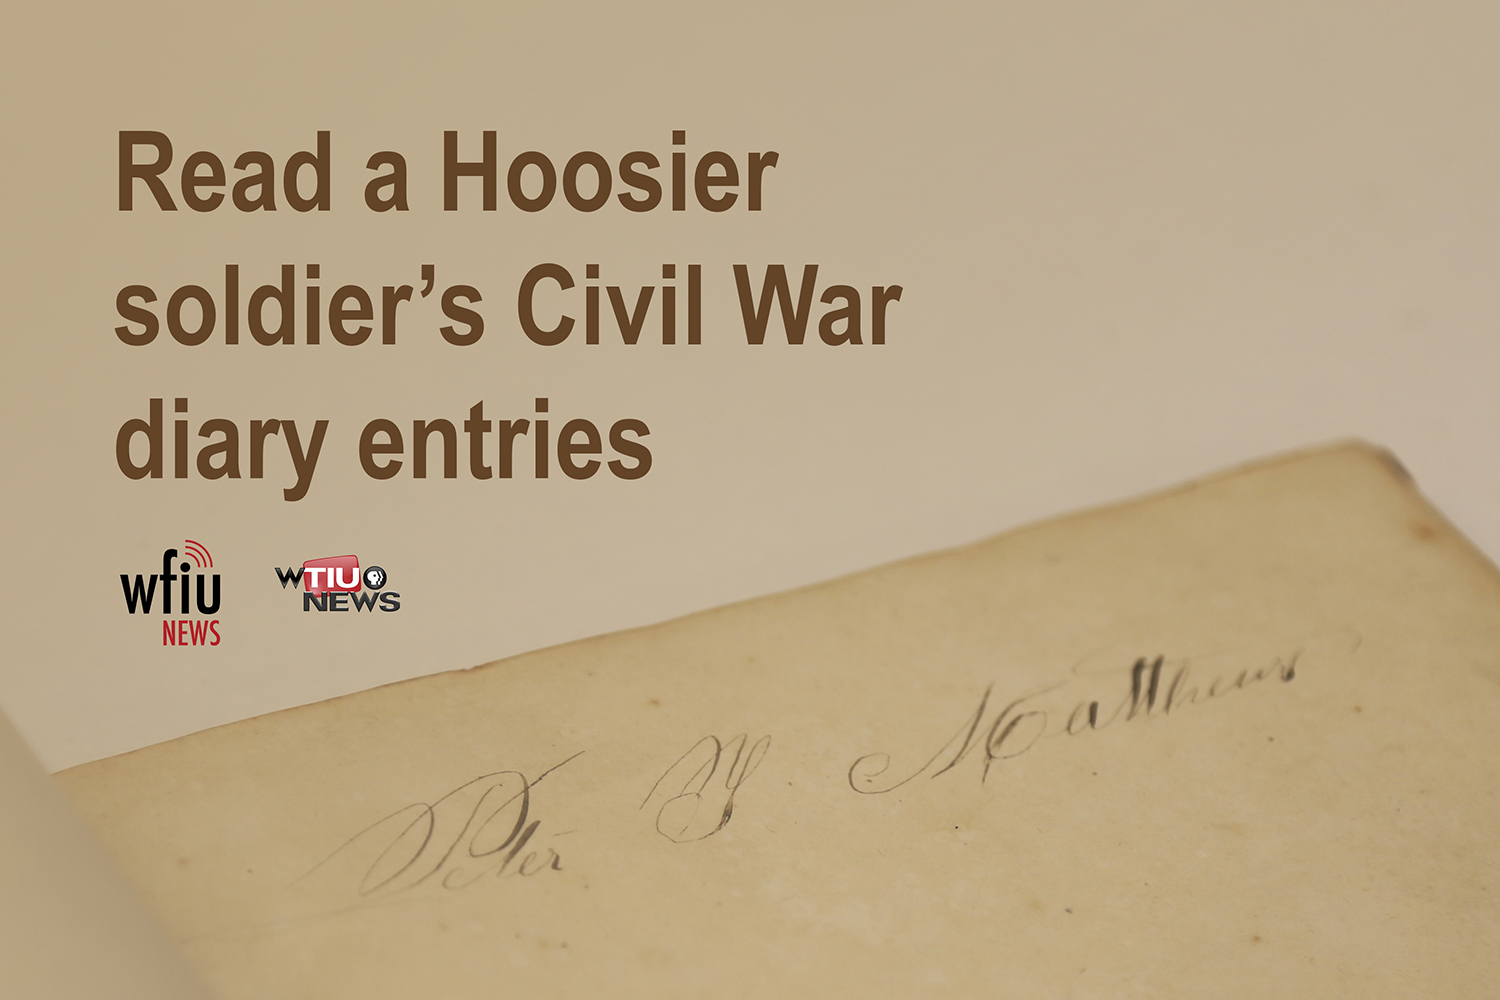 A photo of a diary with the text read the diary of a hoosier civil war soldier.